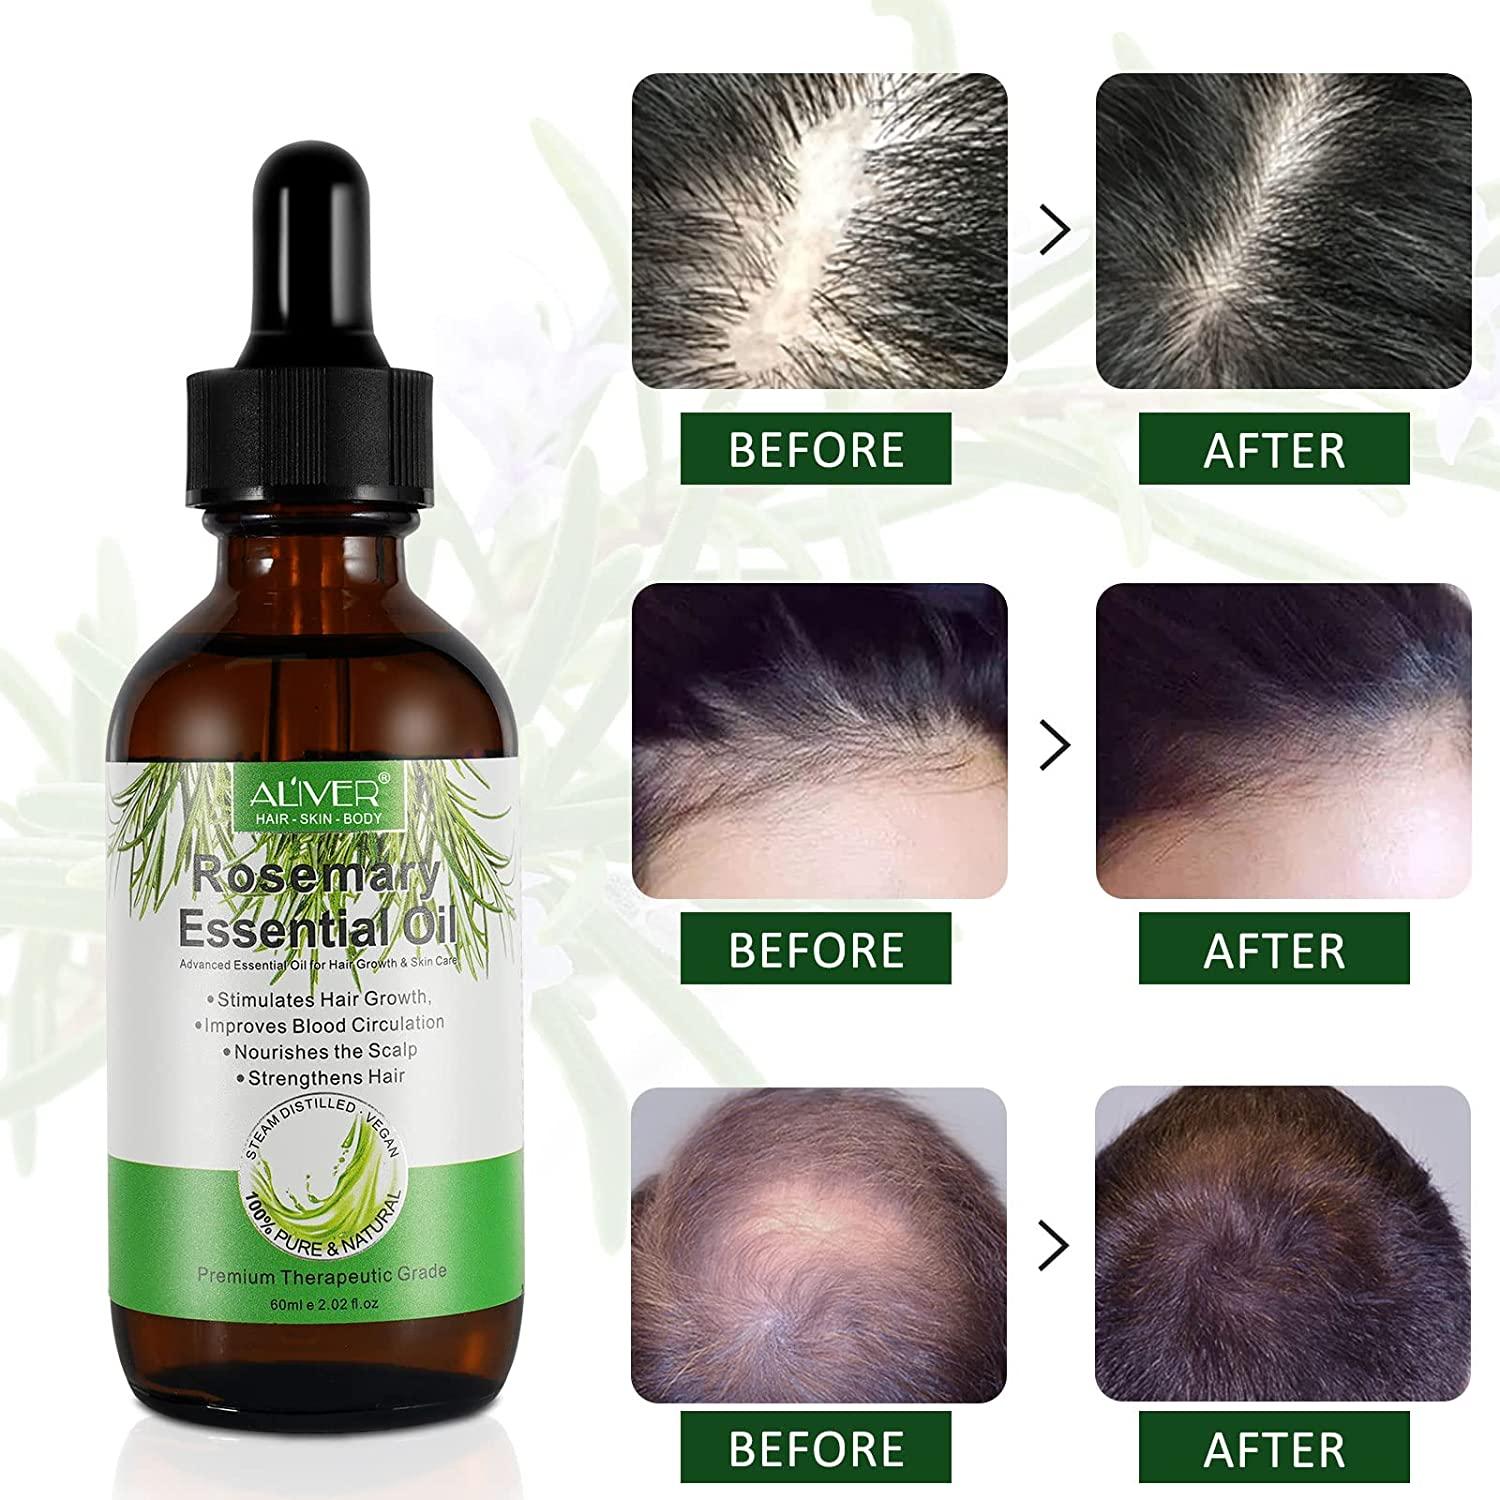 Rosemary Oil for Hair Growth & Skin Care, Rosemary Essential Oil,  Nourishment Scalp, Stimulates Hair Growth,Improves Blood Circulation,Rid of  Itchy & Dry Scalp, Hair Loss Treatment, Rosemary Hair Oil 2.02 Fl Oz (